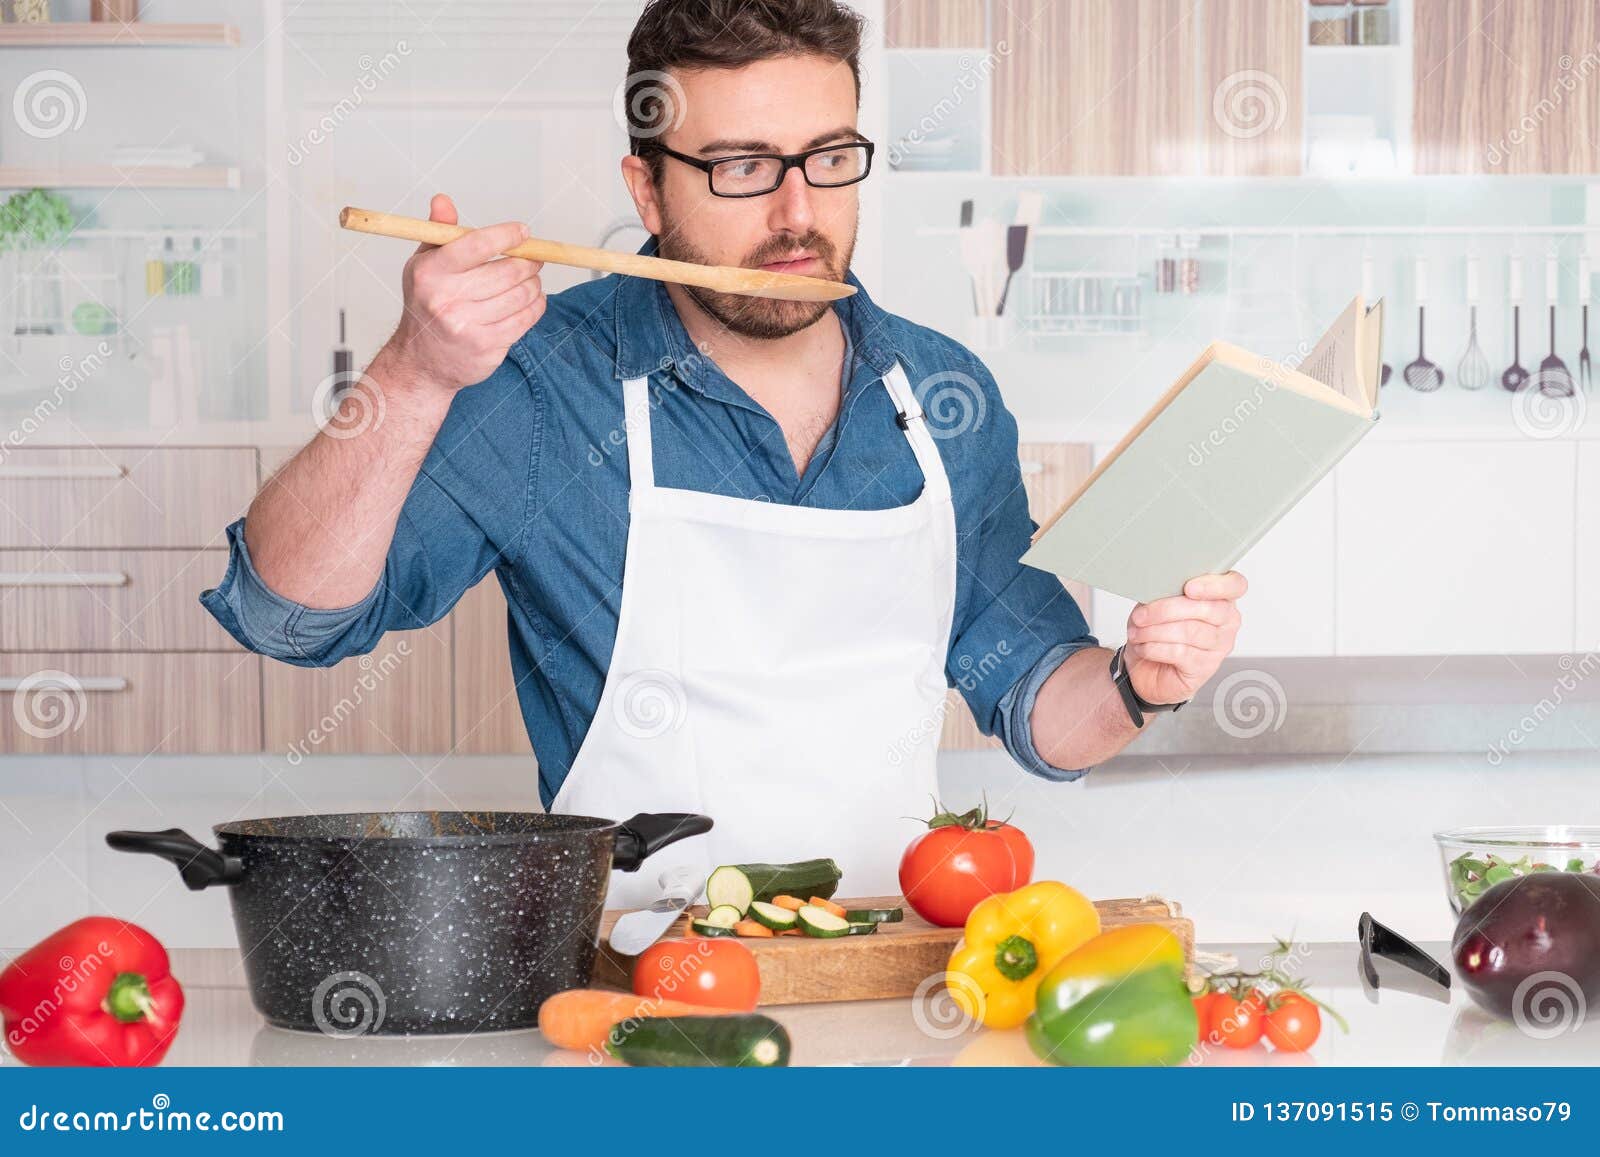 Man Cooking At Home Reading From Recipe Book Stock Image - Image of